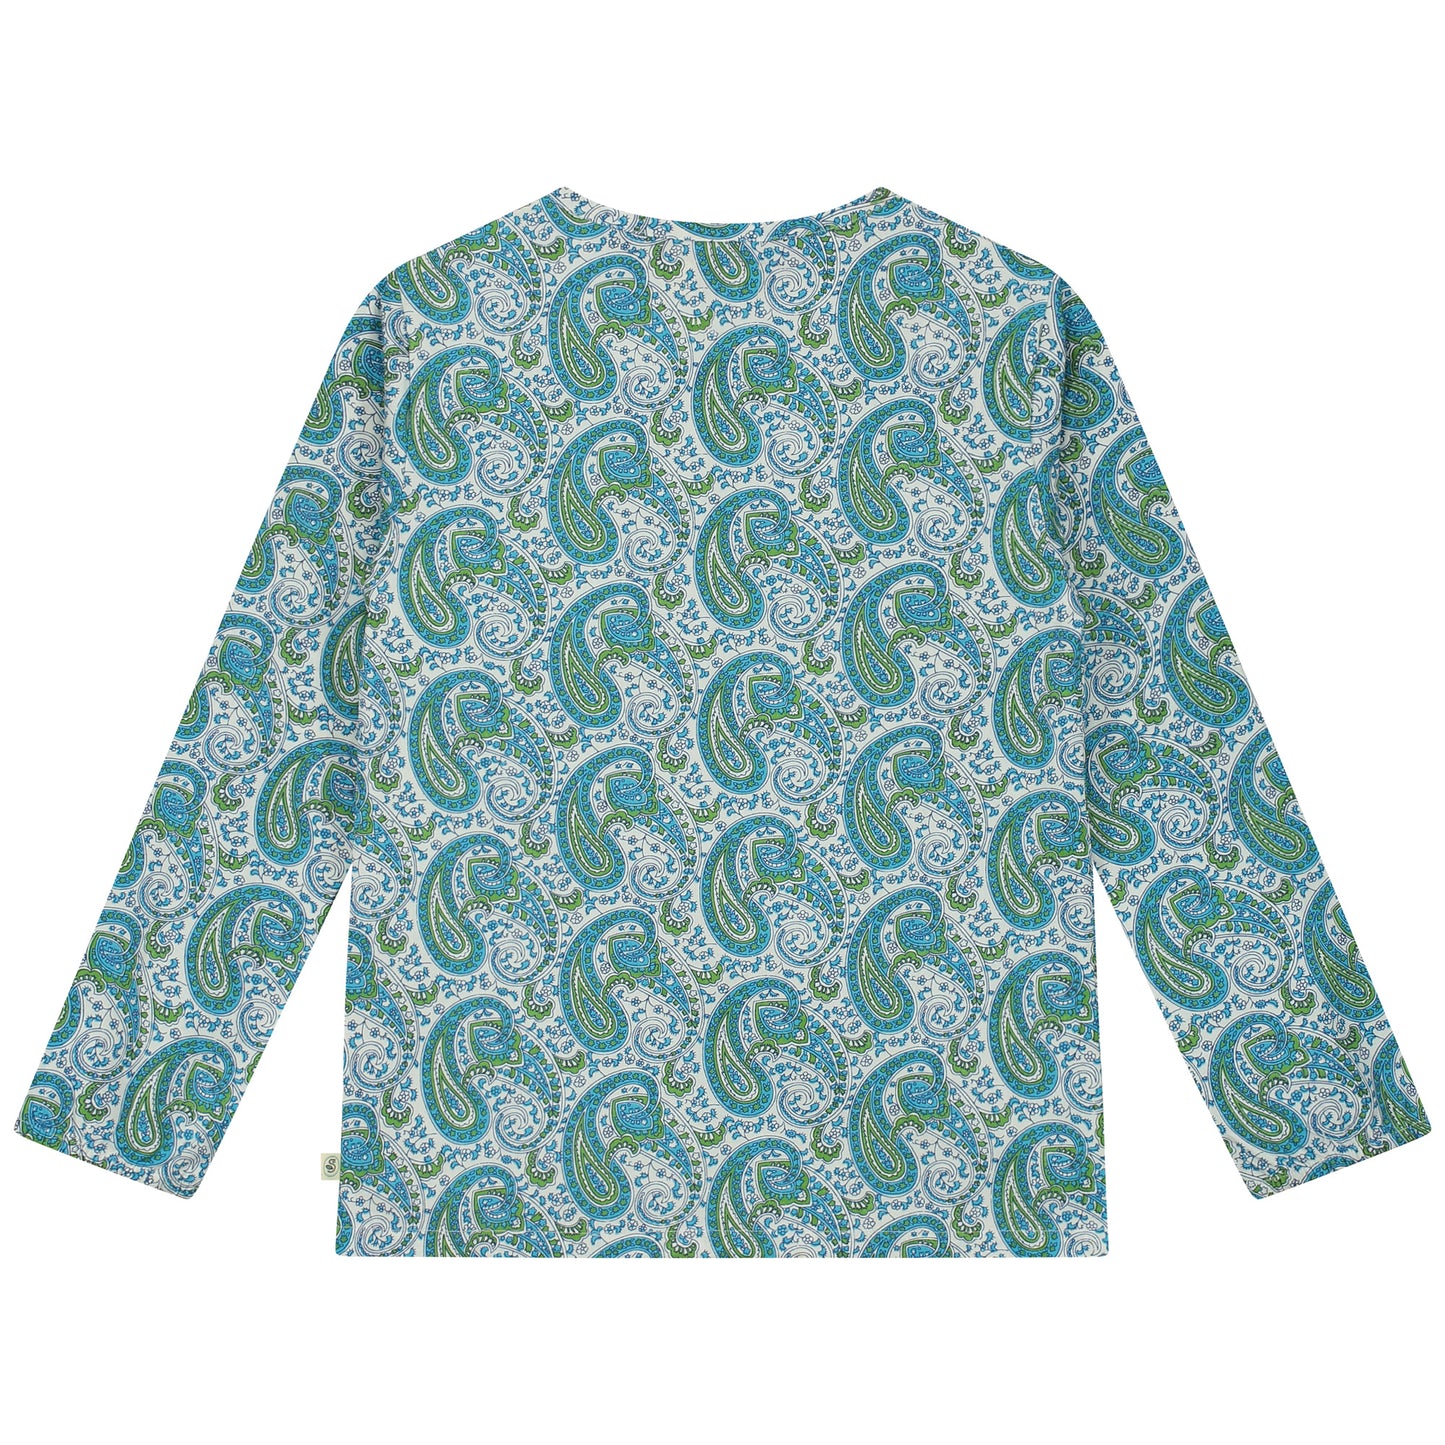 Lange mouwen woven blouse met all-over paisleyprint